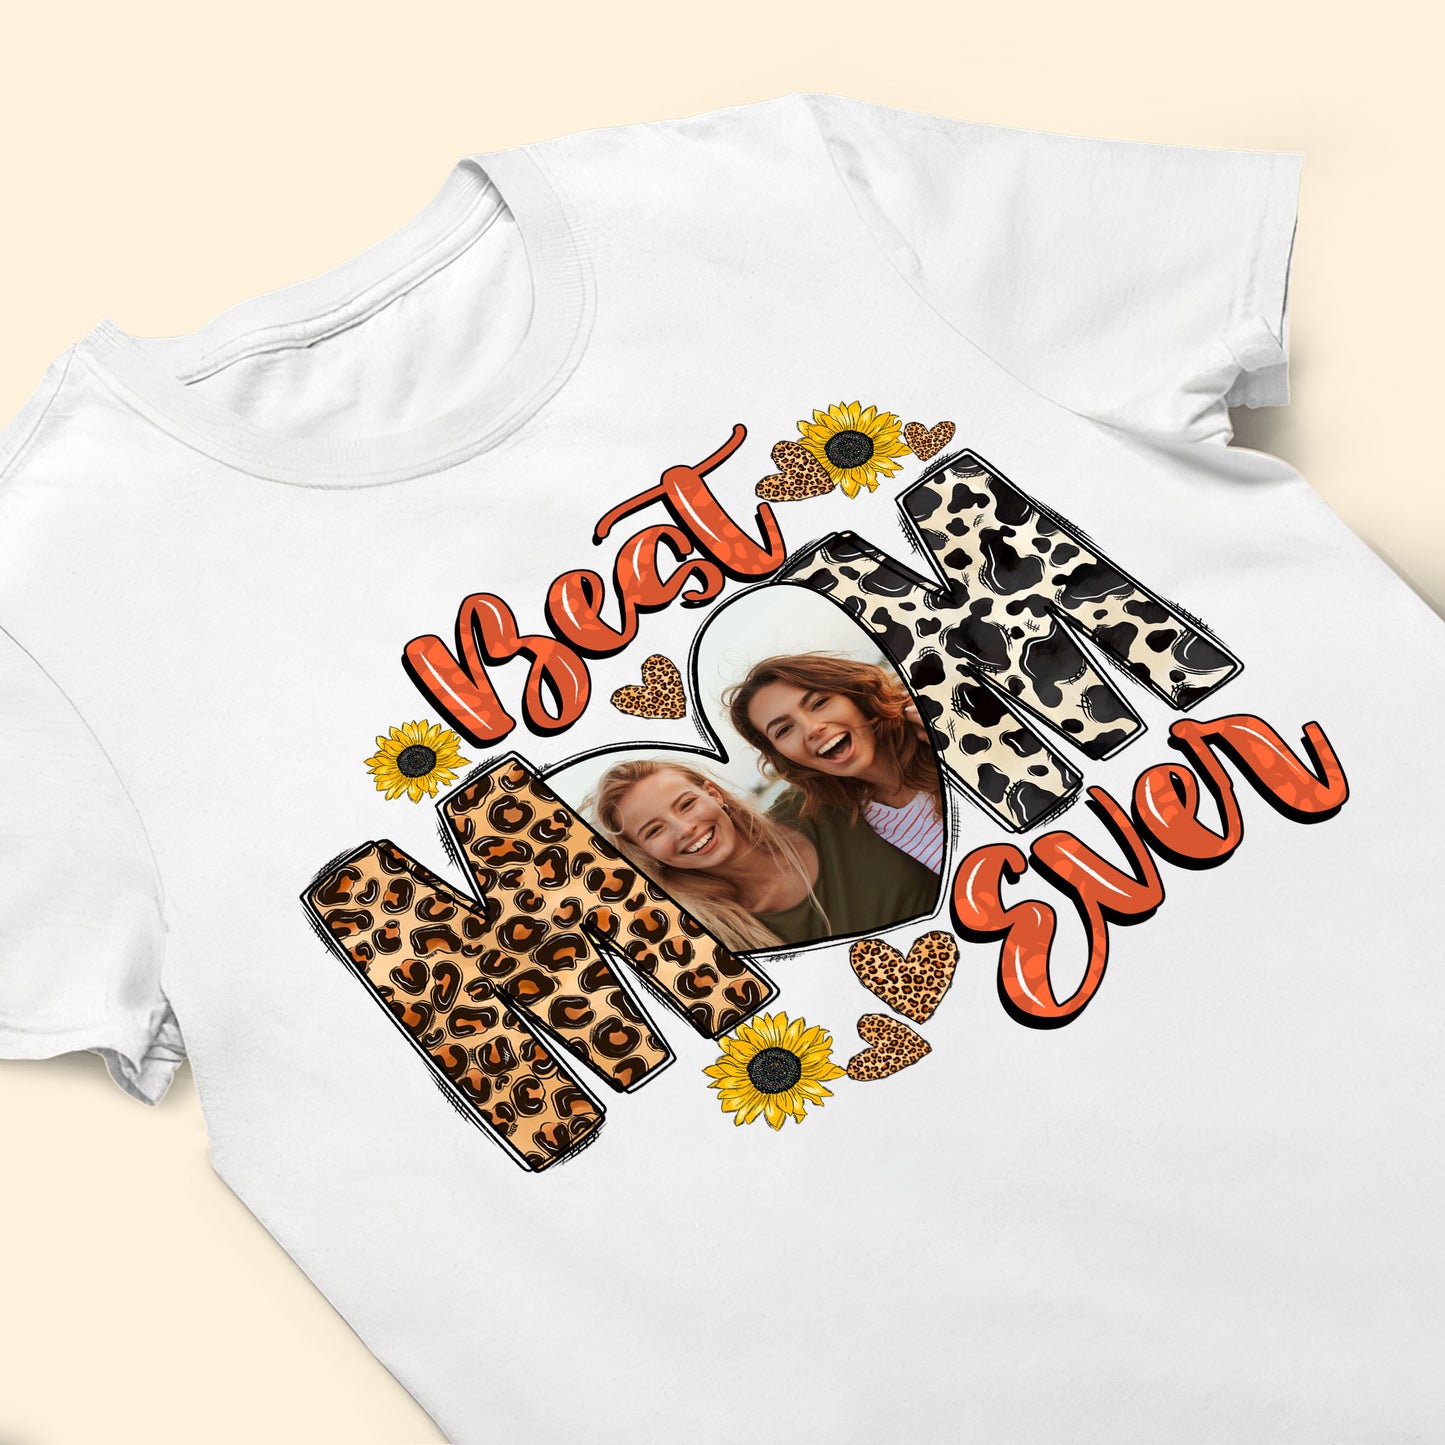 The Best Mom - Personalized Photo Shirt